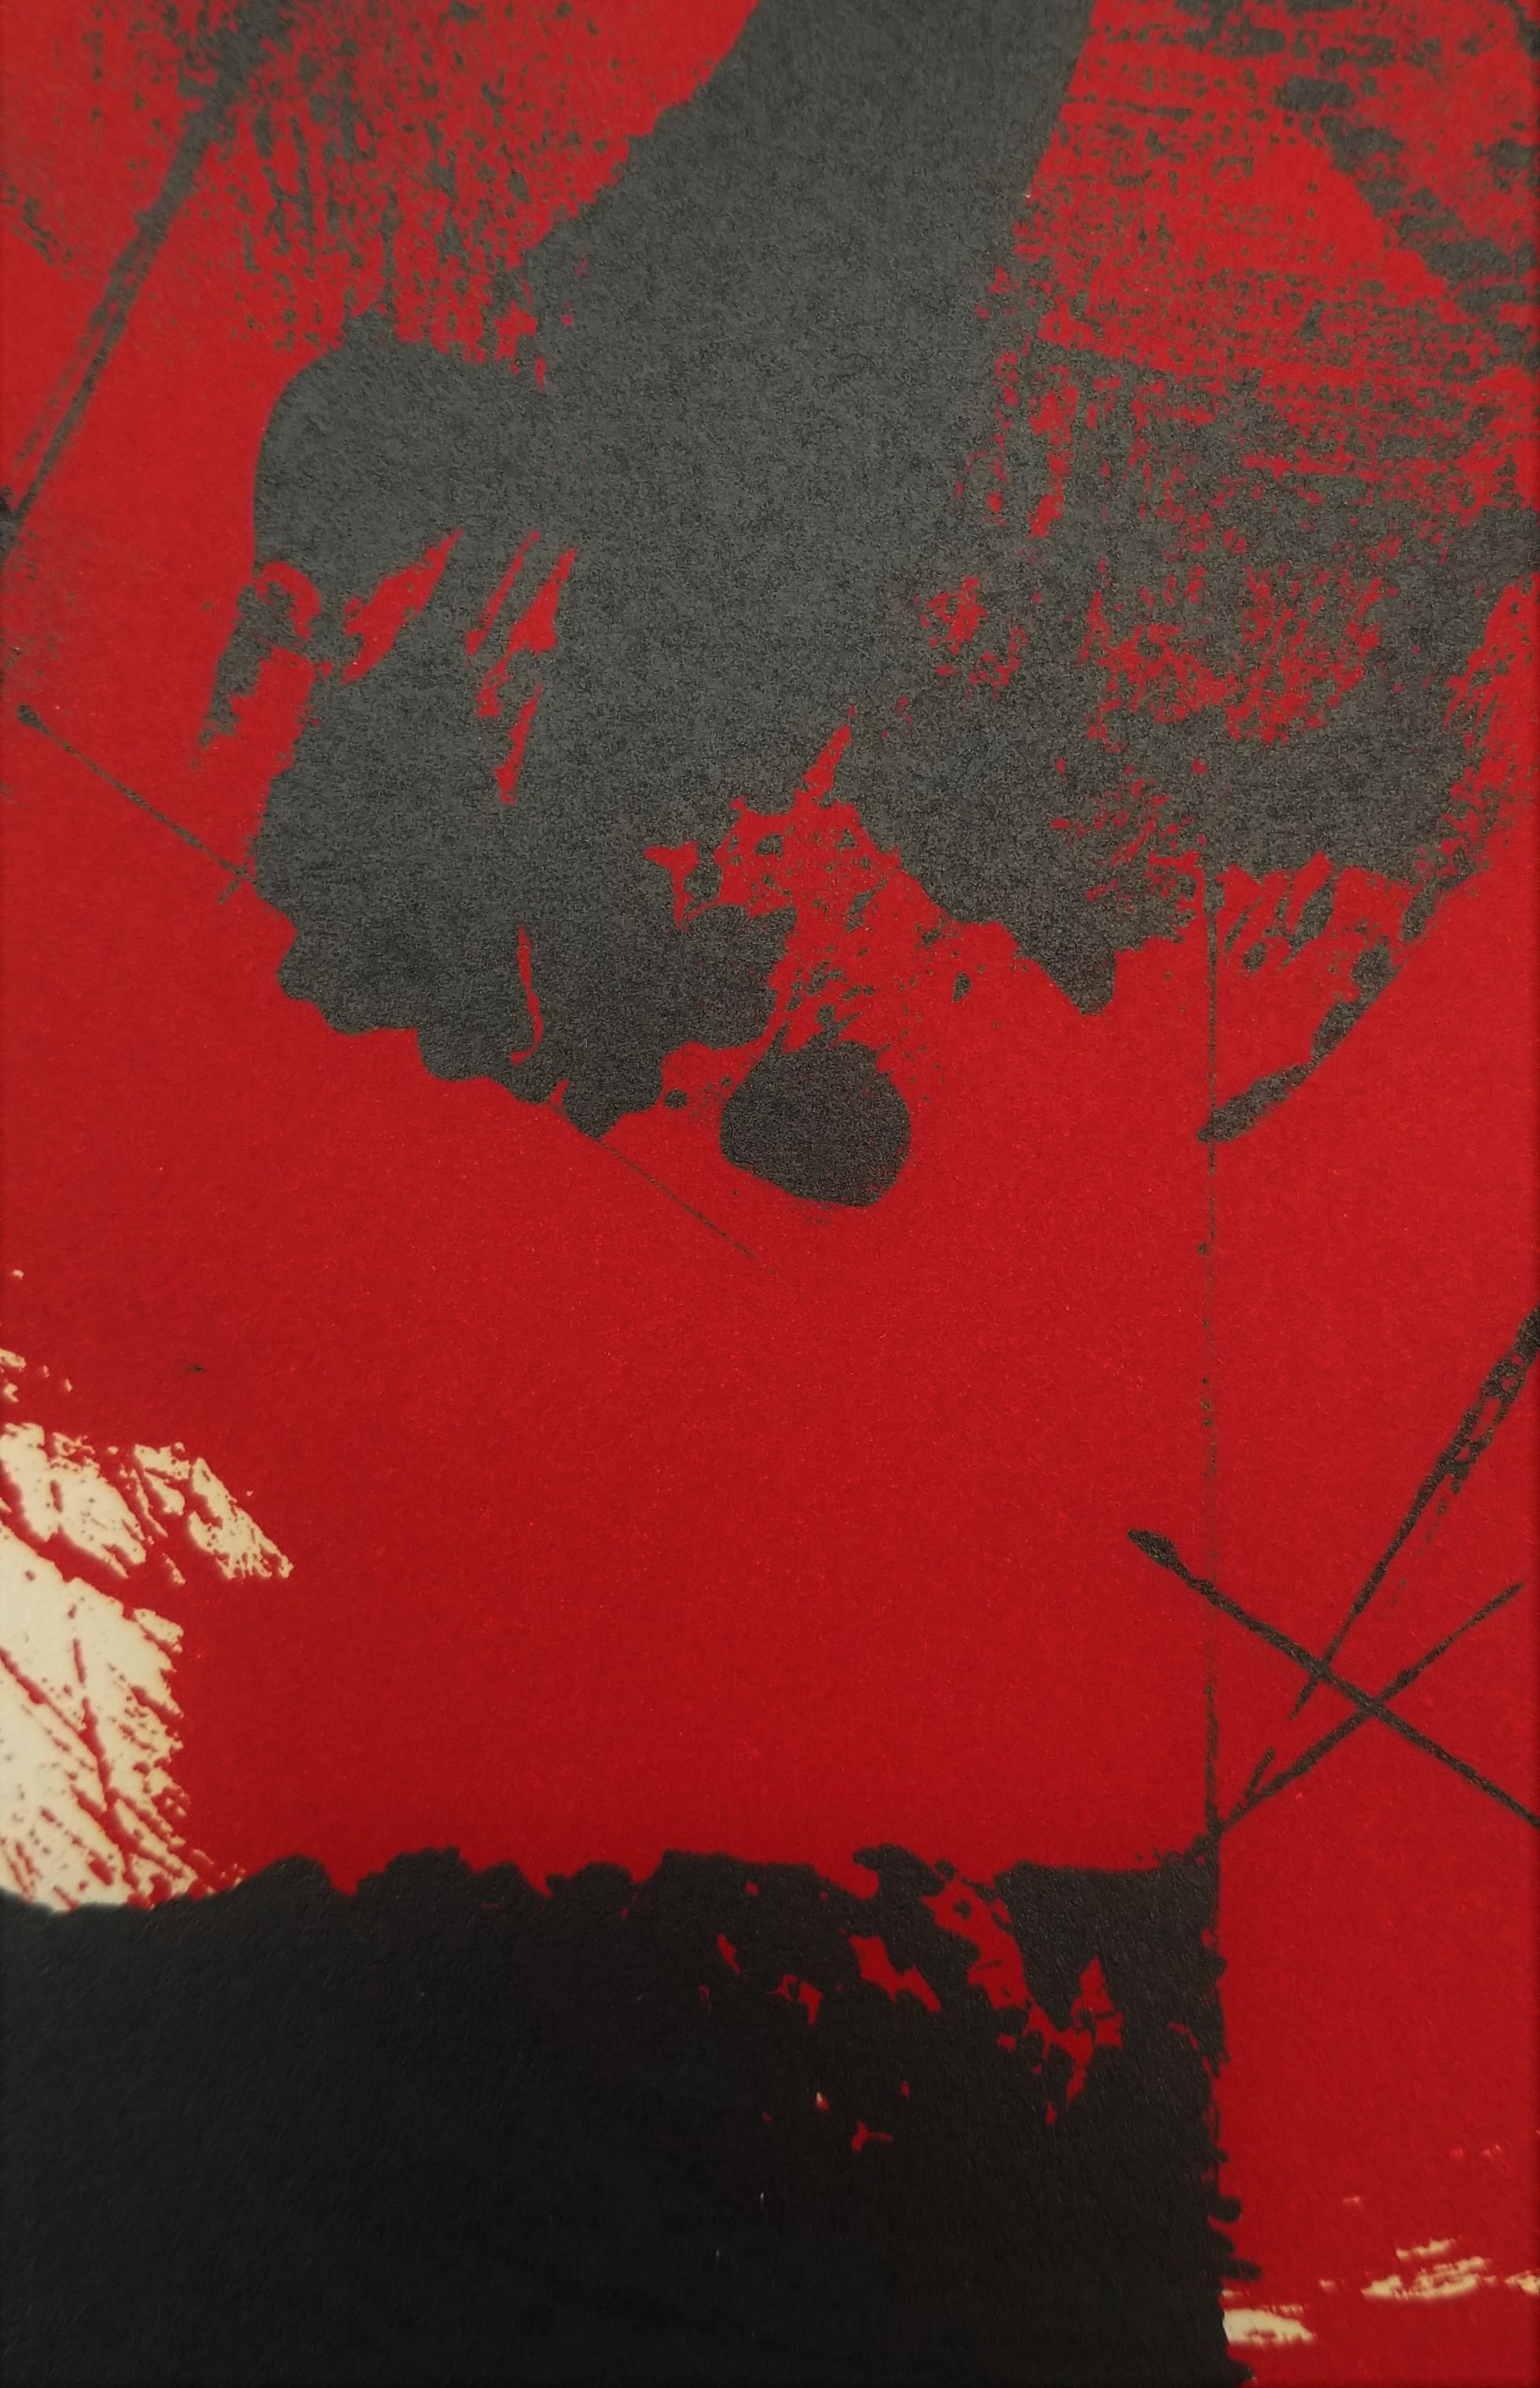 Red and Black II /// Abstract Expressionist Lynn Chadwick British Minimalism Art For Sale 9